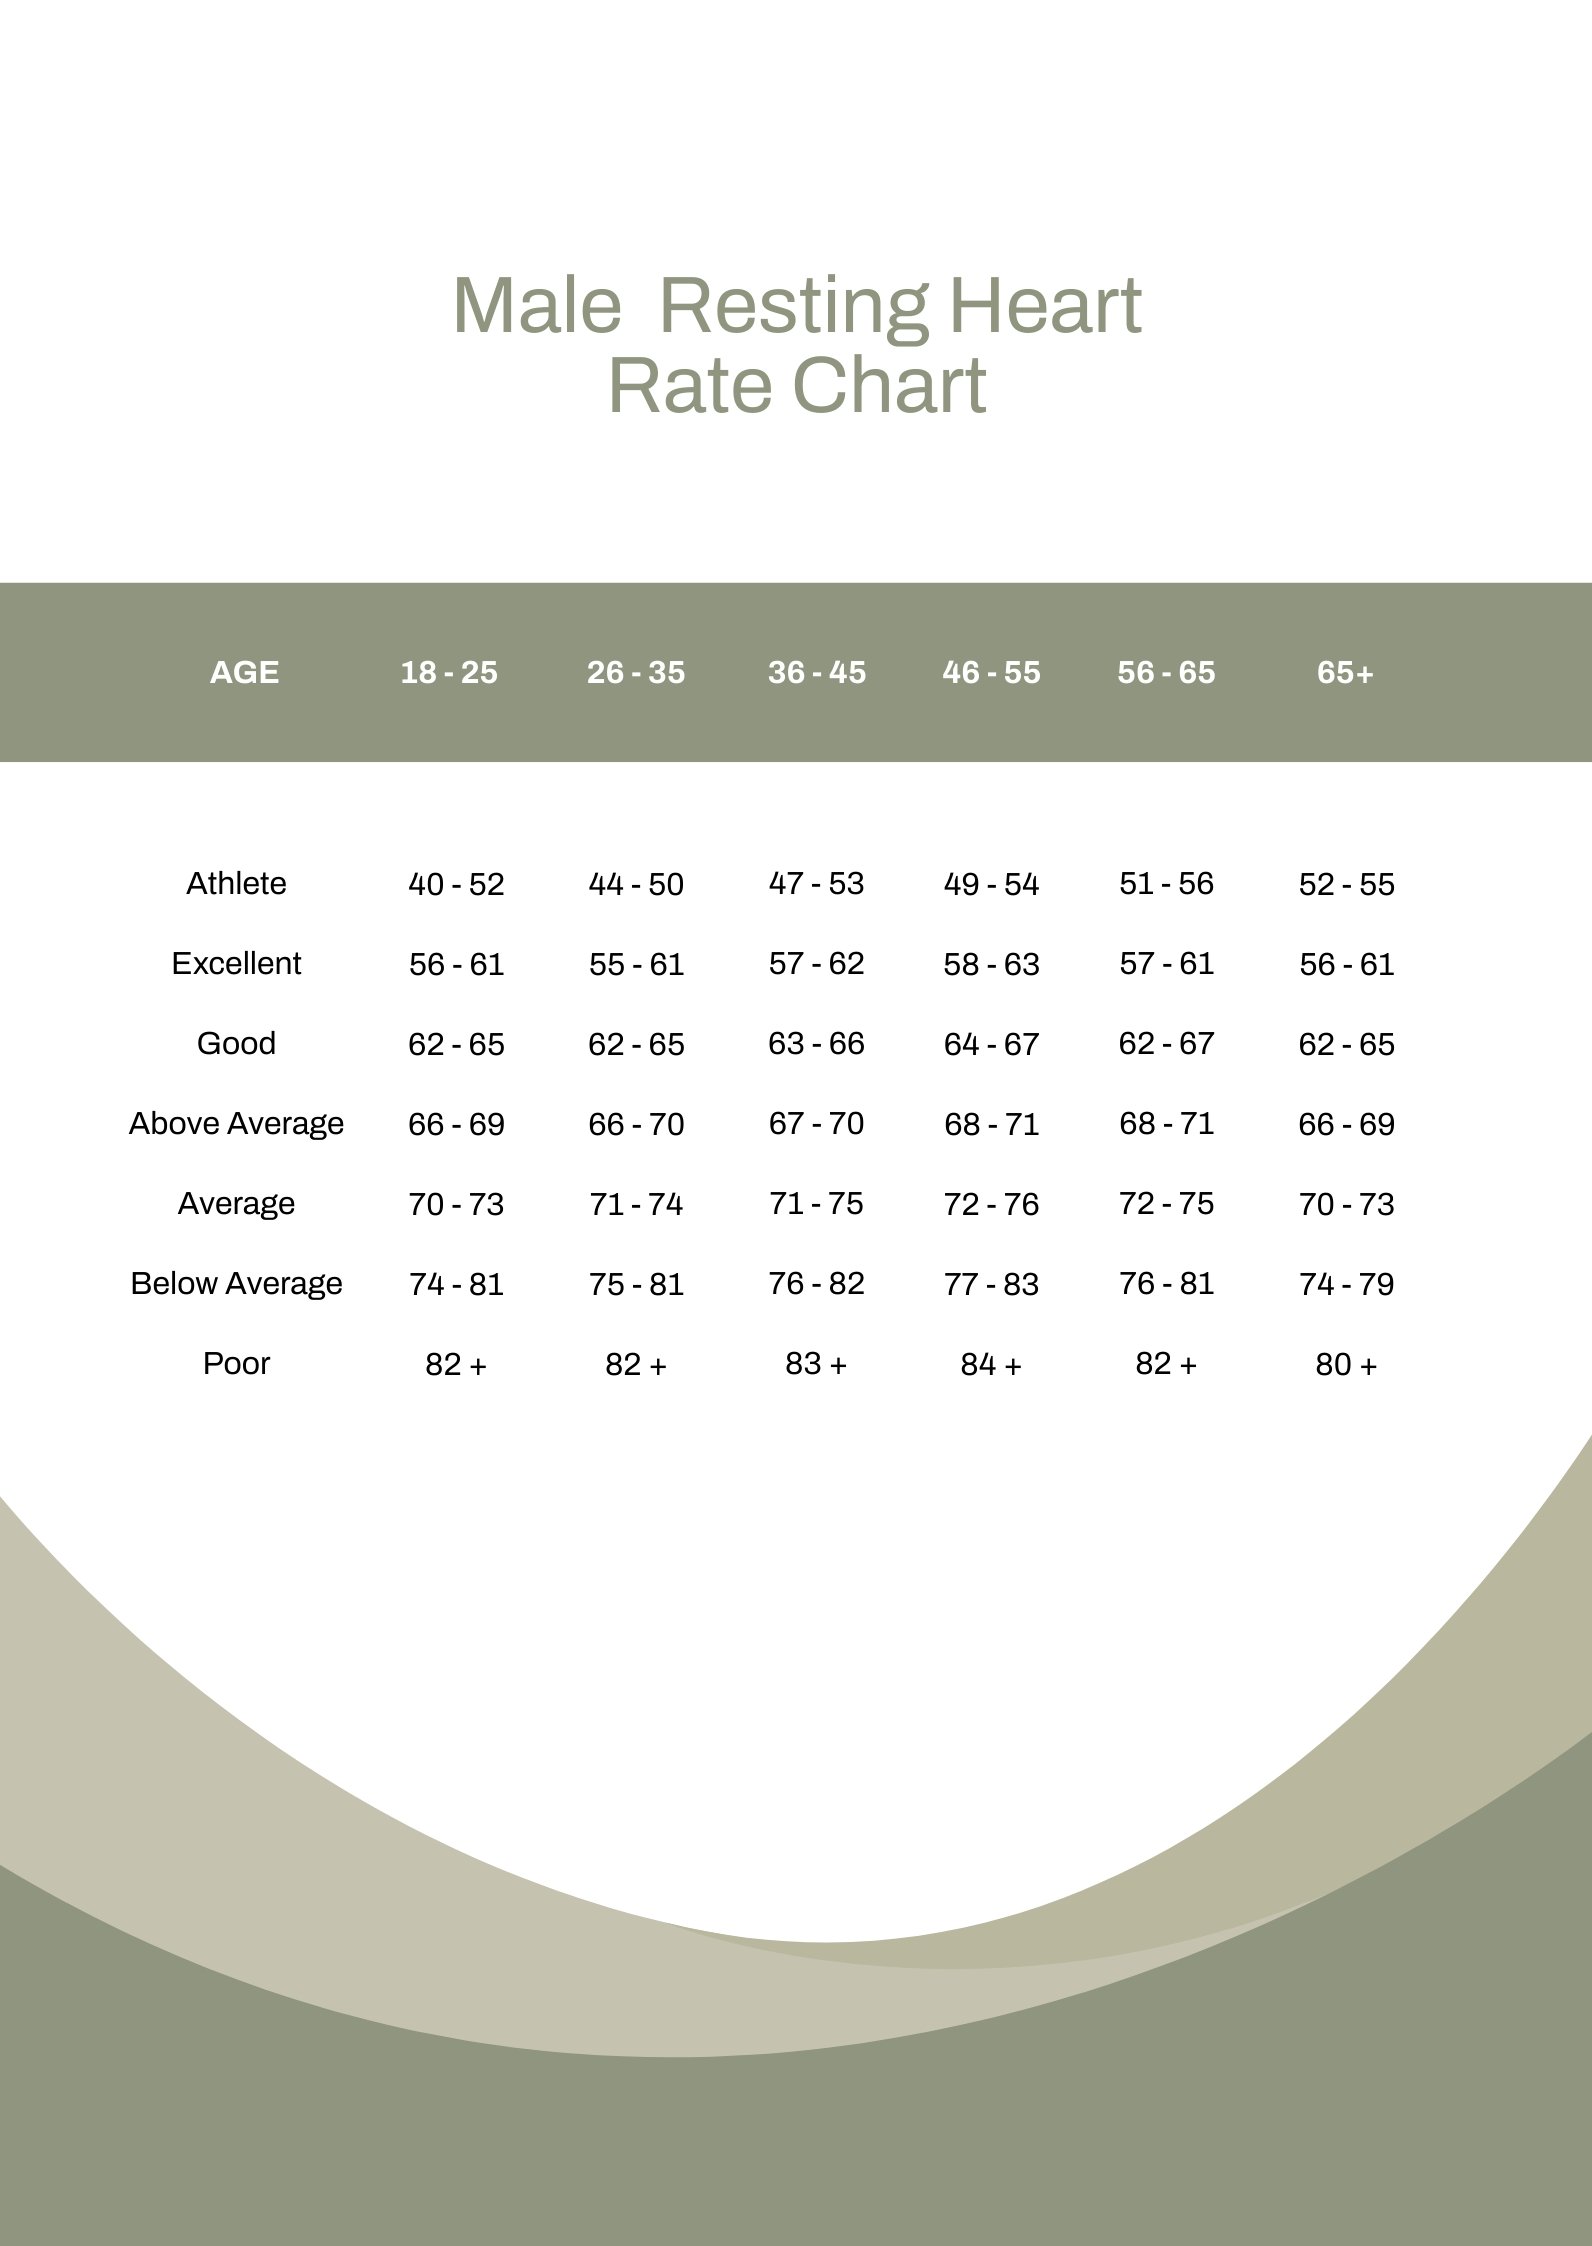 Free Male Resting Heart Rate Chart - Download In Pdf | Template.Net